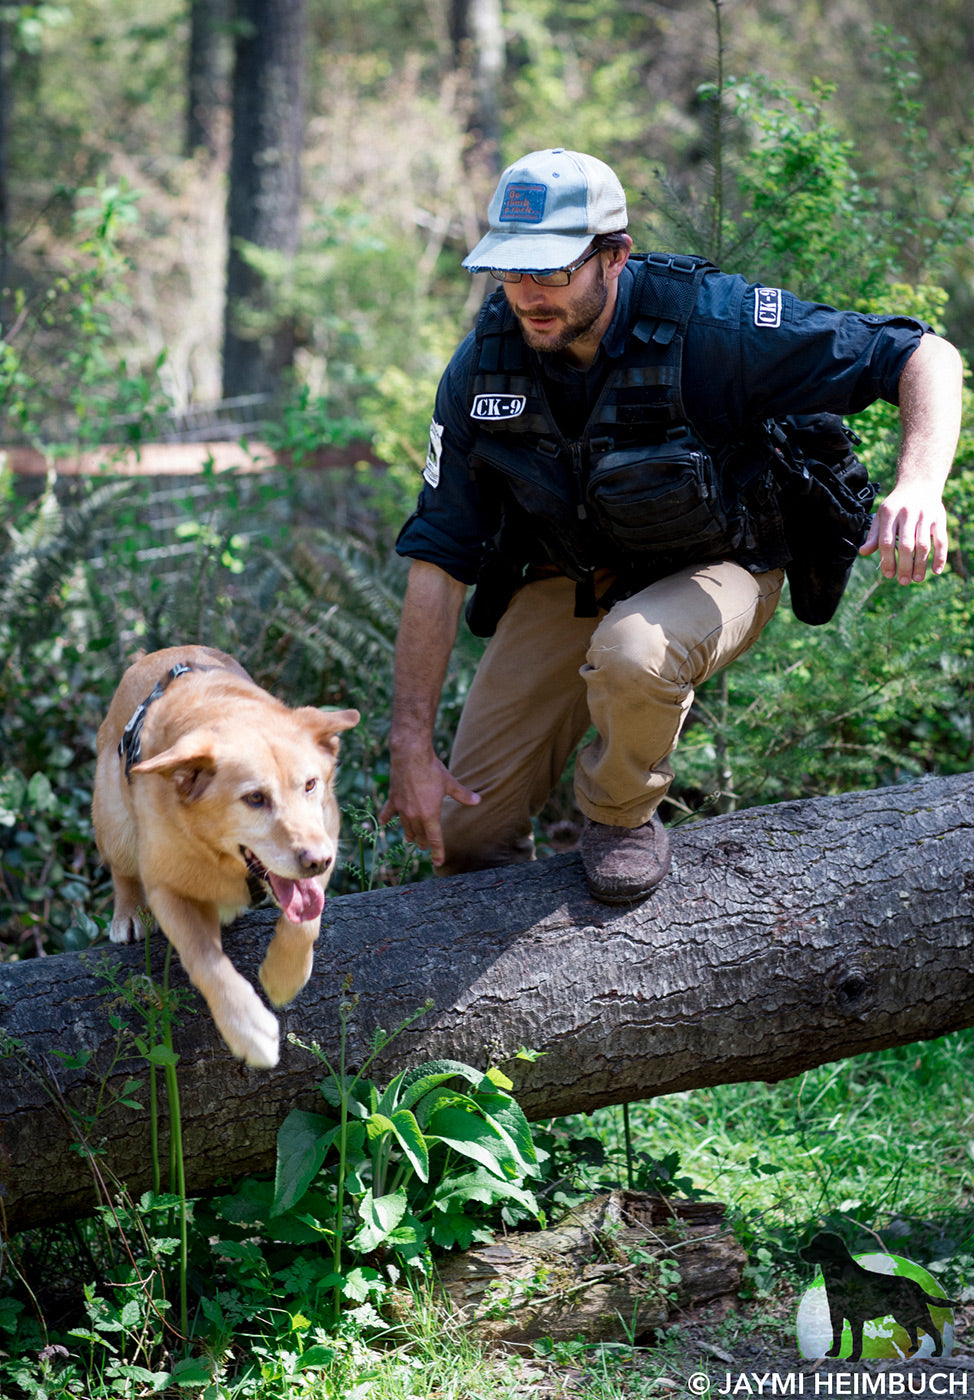 Chester working in the woods with handler.